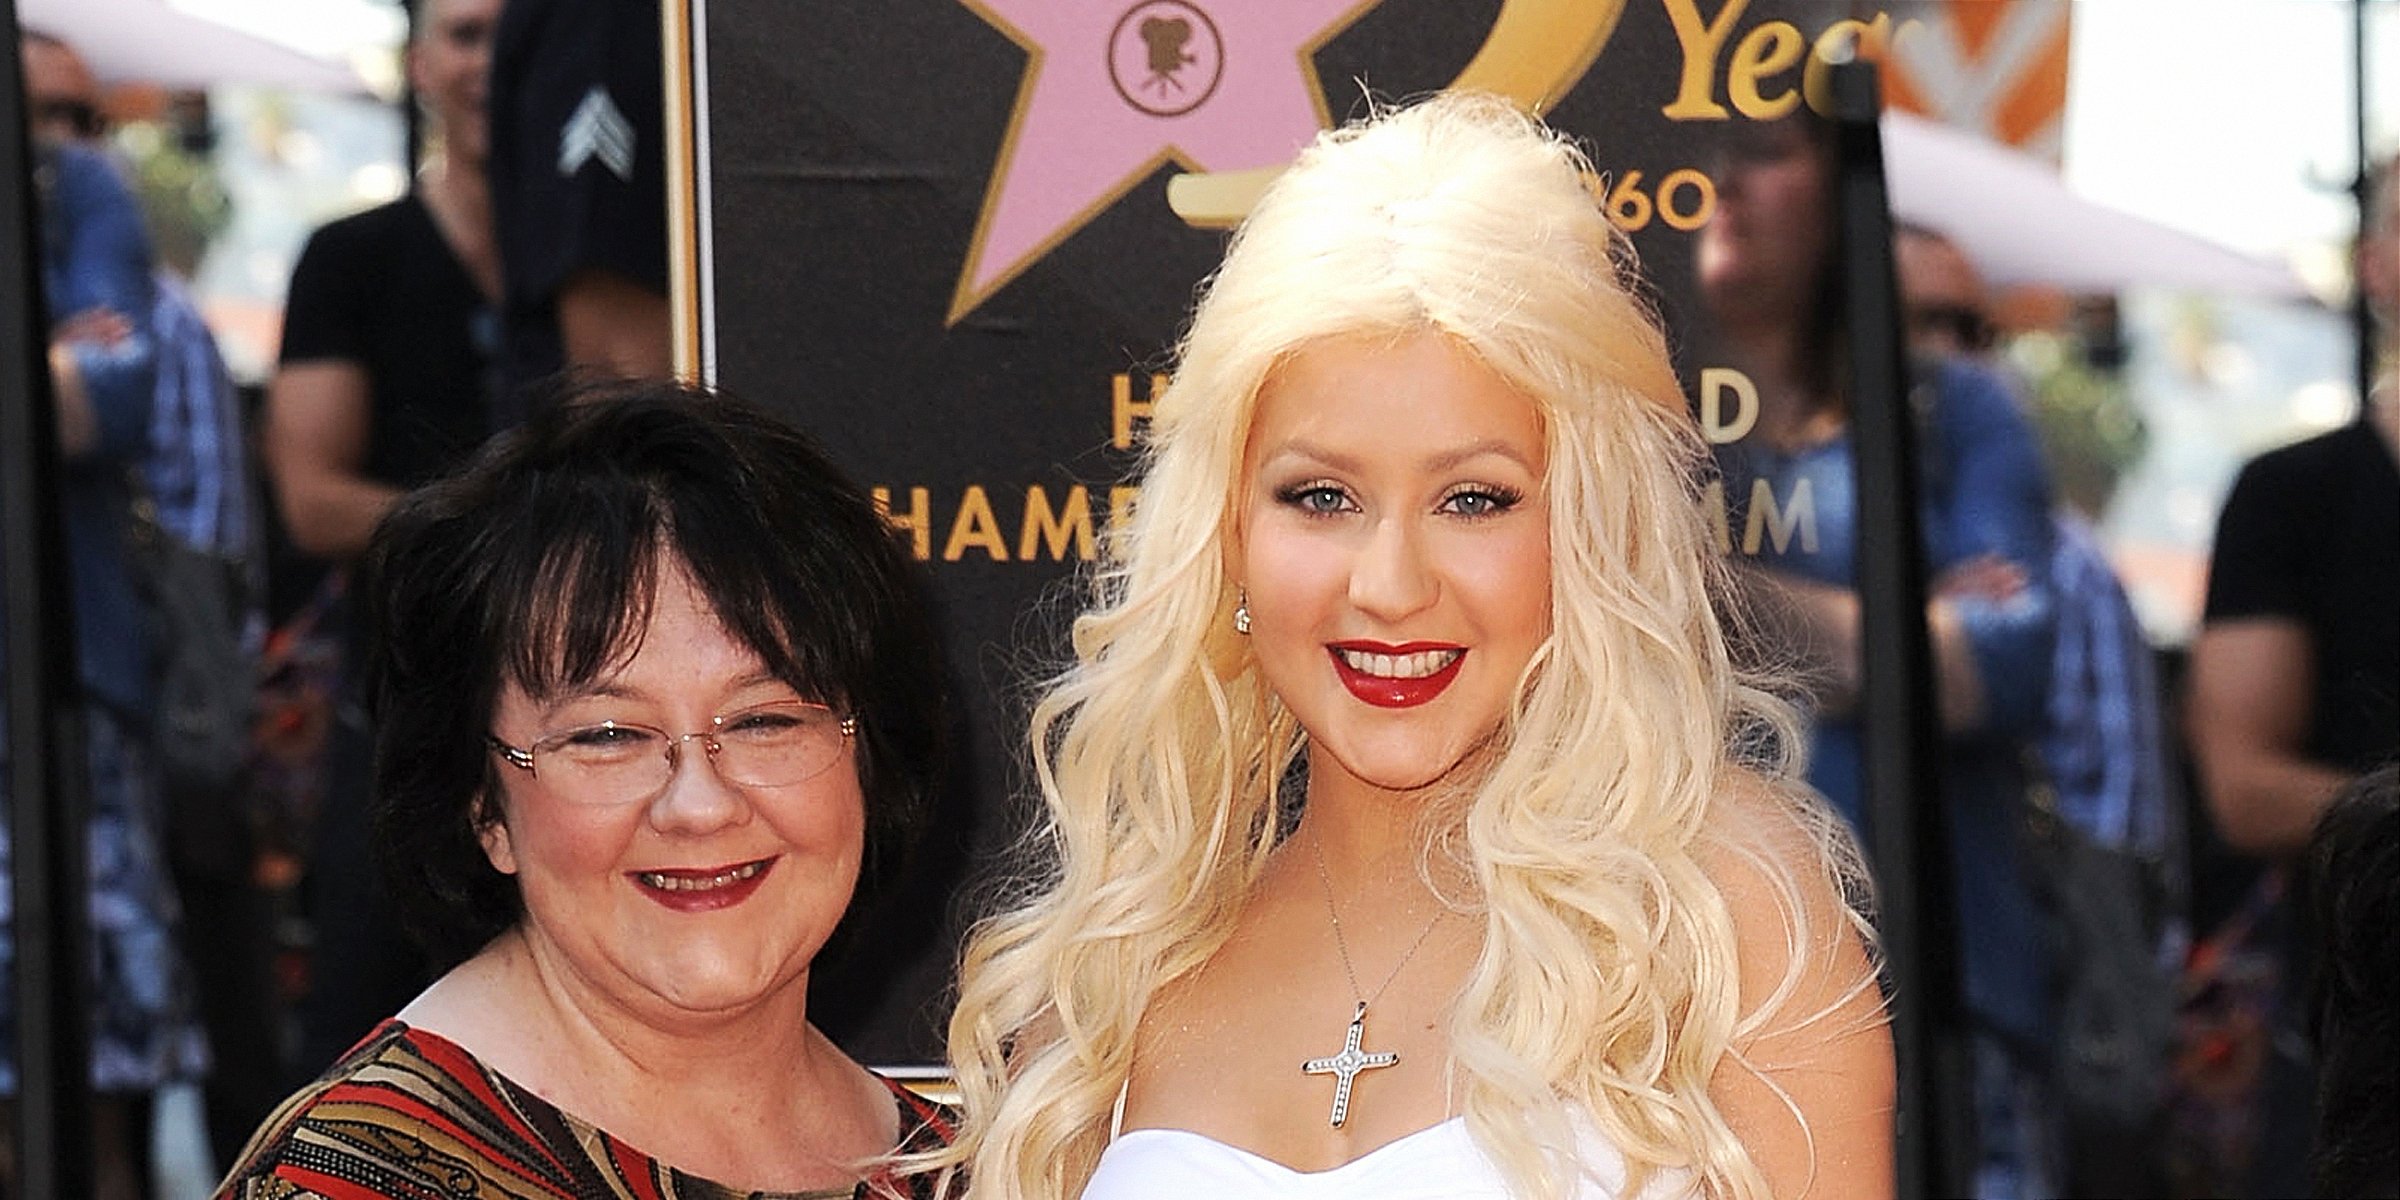 Shelly Loraine Kearns and Christina Aguilera | Source: Getty Images